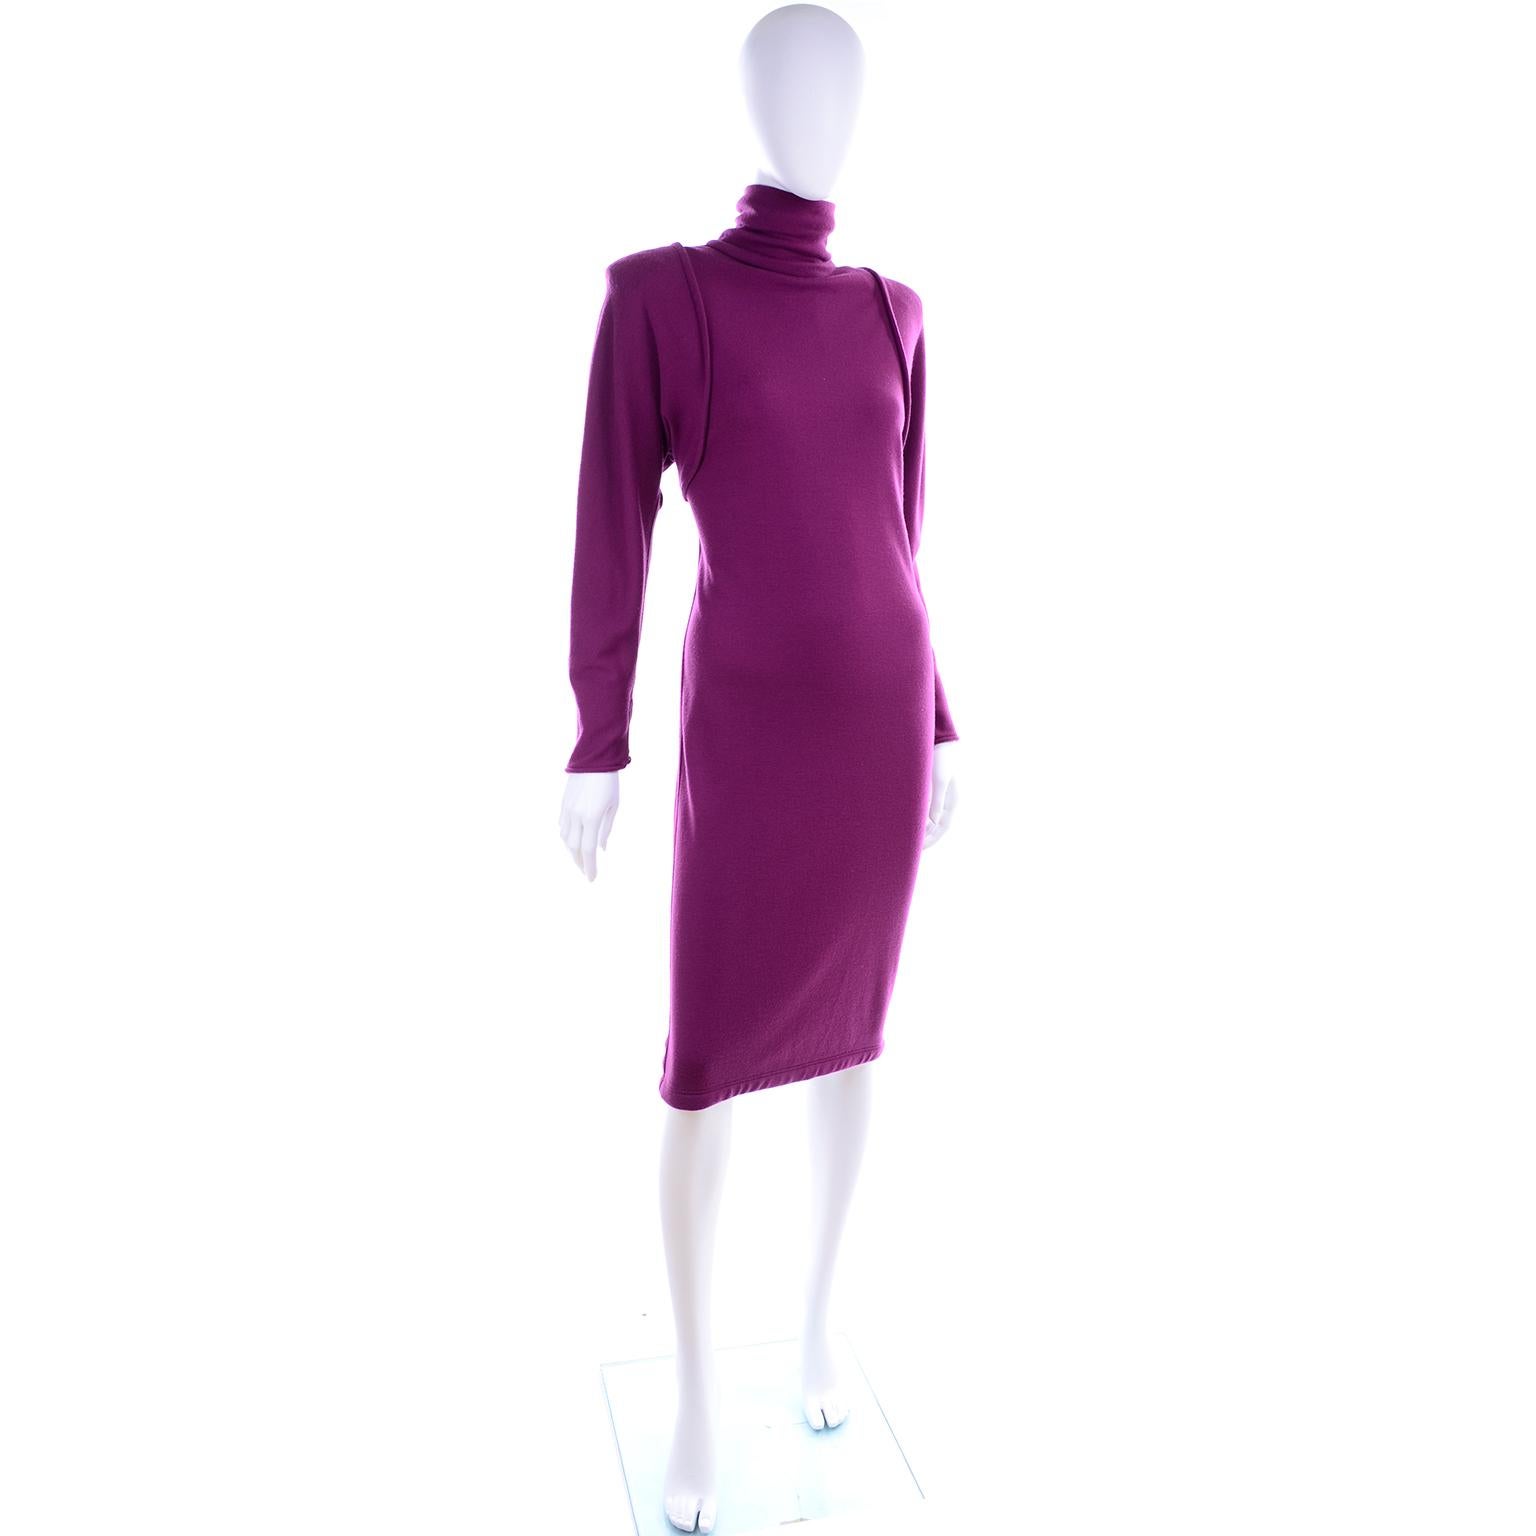 We acquired this deadstock Emanuel Ungaro purple dress from an estate of outstanding vintage designer clothing and accessories from the 1970's and 1980's.  We love Ungaro vintage dresses and we usually buy them whenever we can!  This vintage purple 